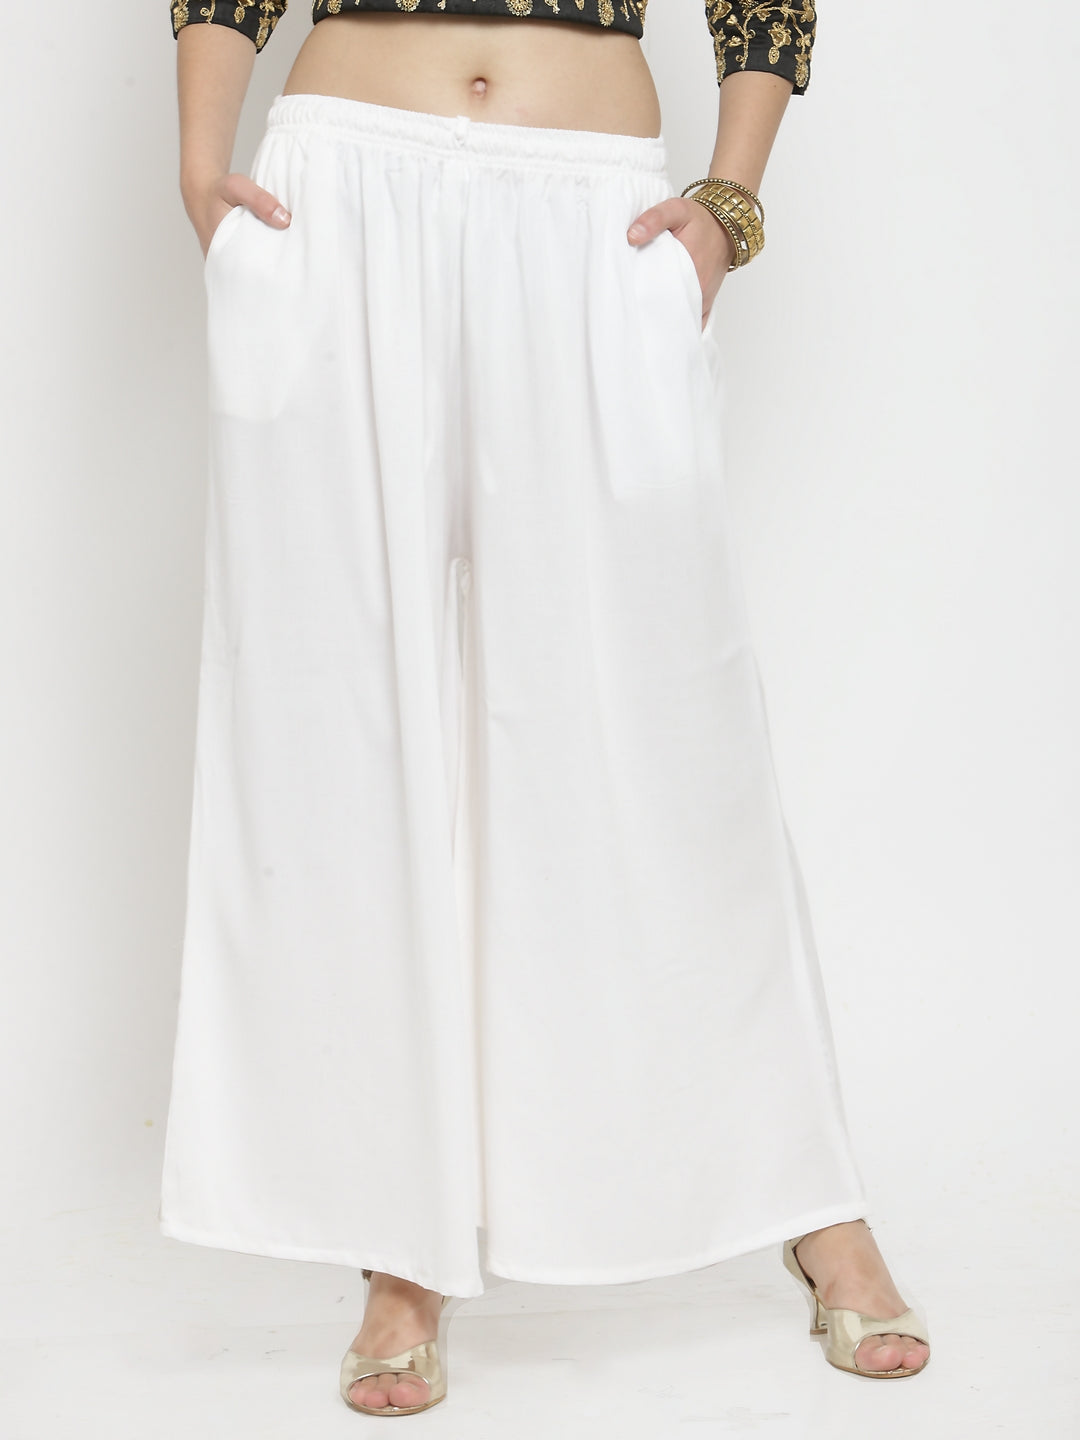 Women's Off-White Solid Rayon Sharara - Wahe-NOOR